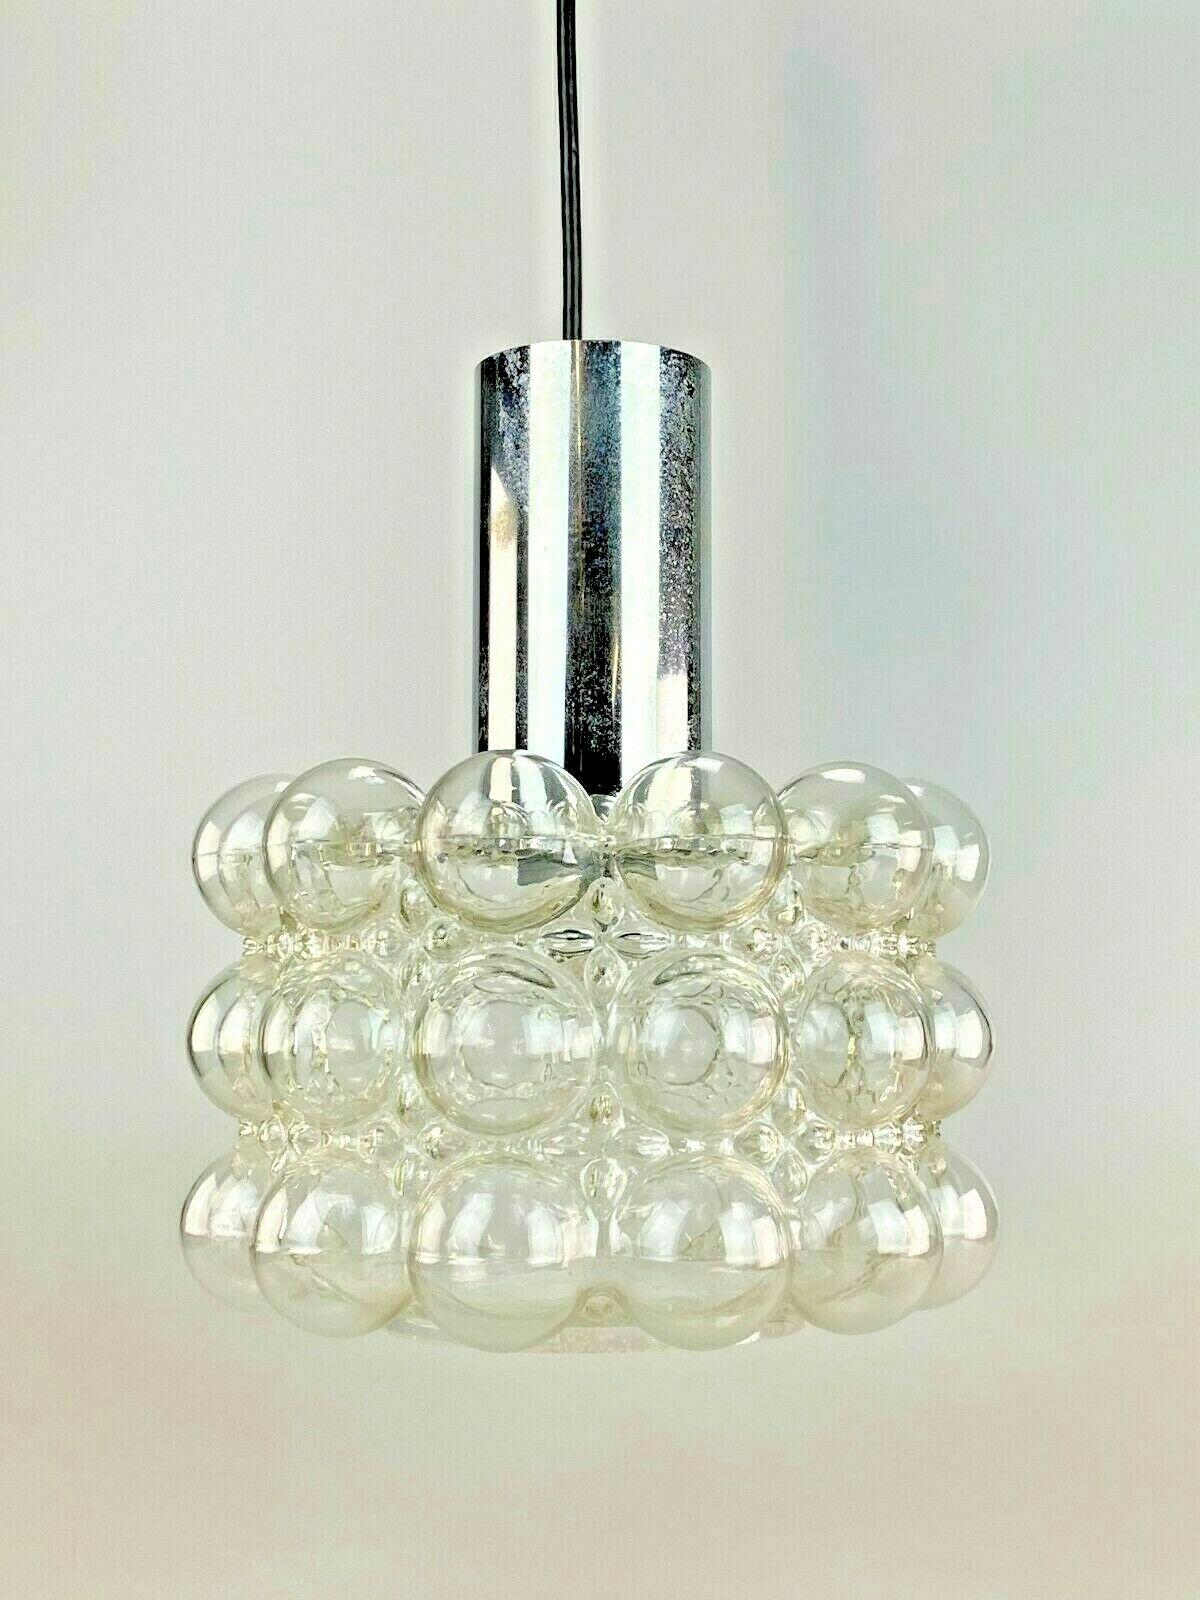 60s 70s lamp light ceiling lamp Helena Tynell Glashütte Limburg Bubble

Object: ceiling lamp

Manufacturer: Helena Tynell, Limburg

Condition: good

Age: around 1960-1970

Dimensions:

Diameter = 25.5cm
Height = 31cm

Other